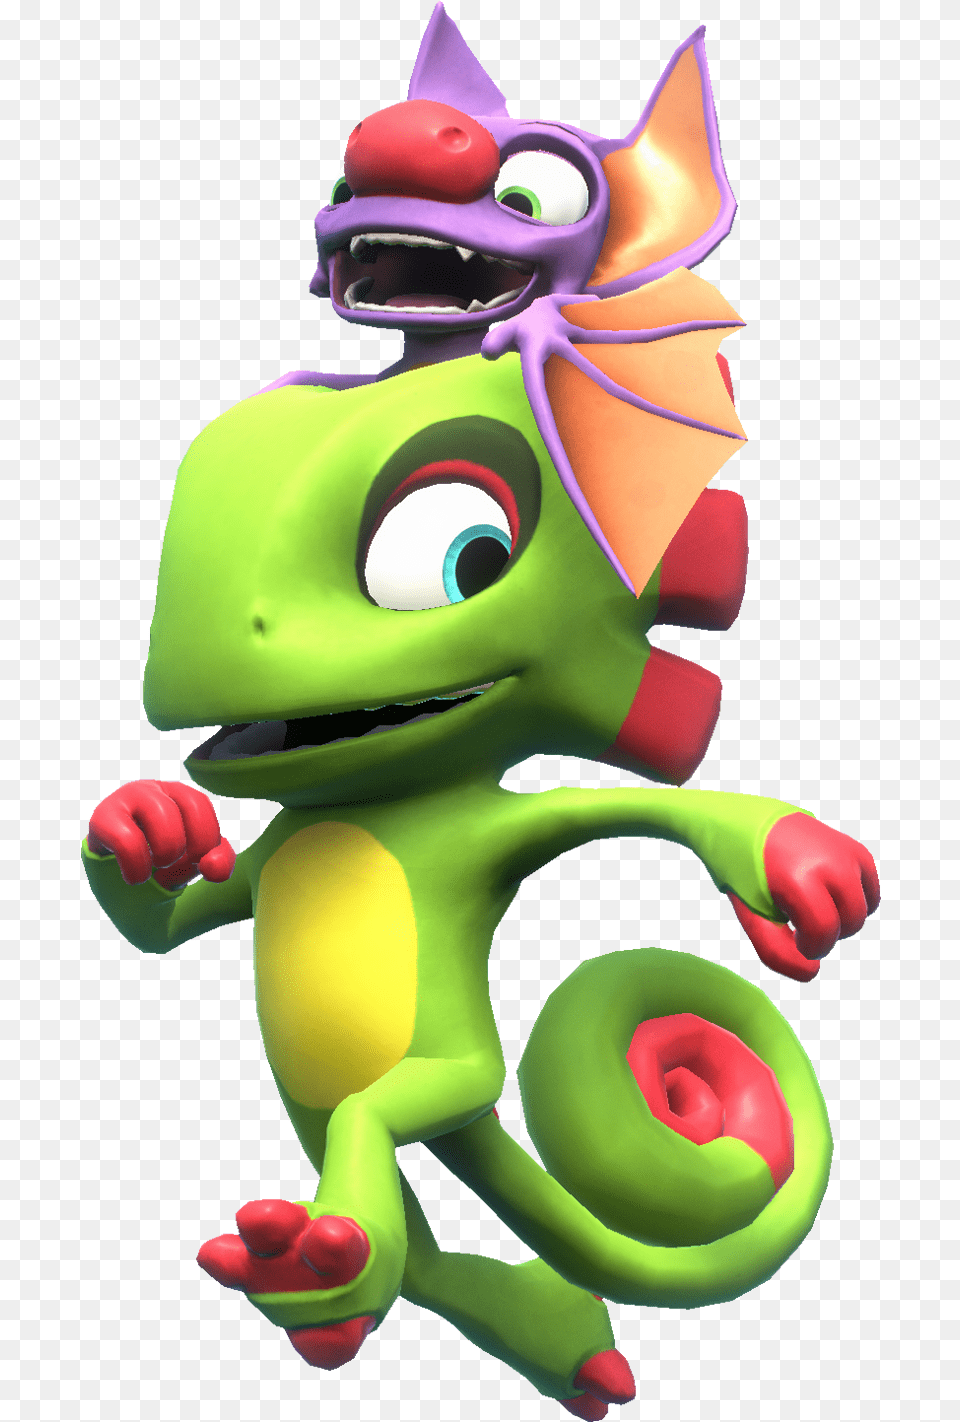 Volt Thumb Brawlout Yooka Laylee Brawlout, Toy Free Png Download